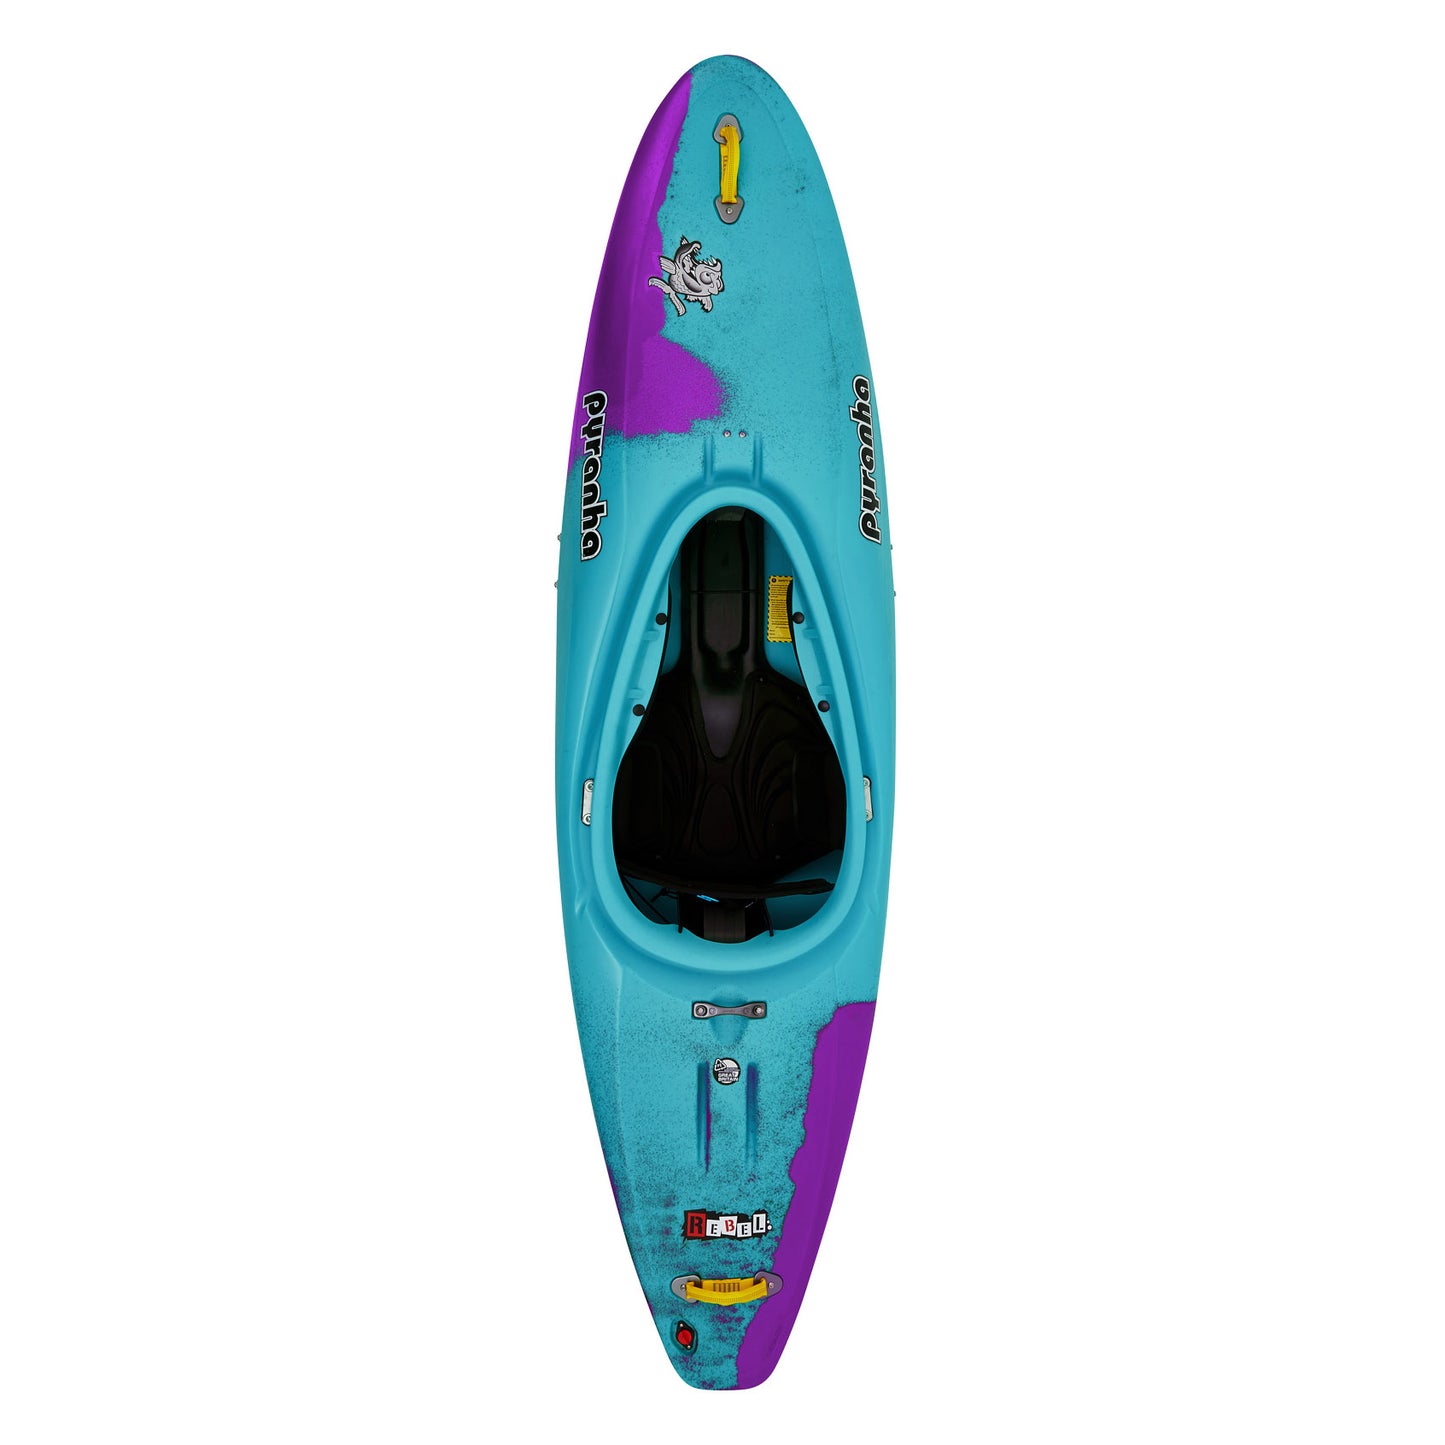 A blue and purple Pyranha Rebel Youth Whitewater Kayak on a white background.